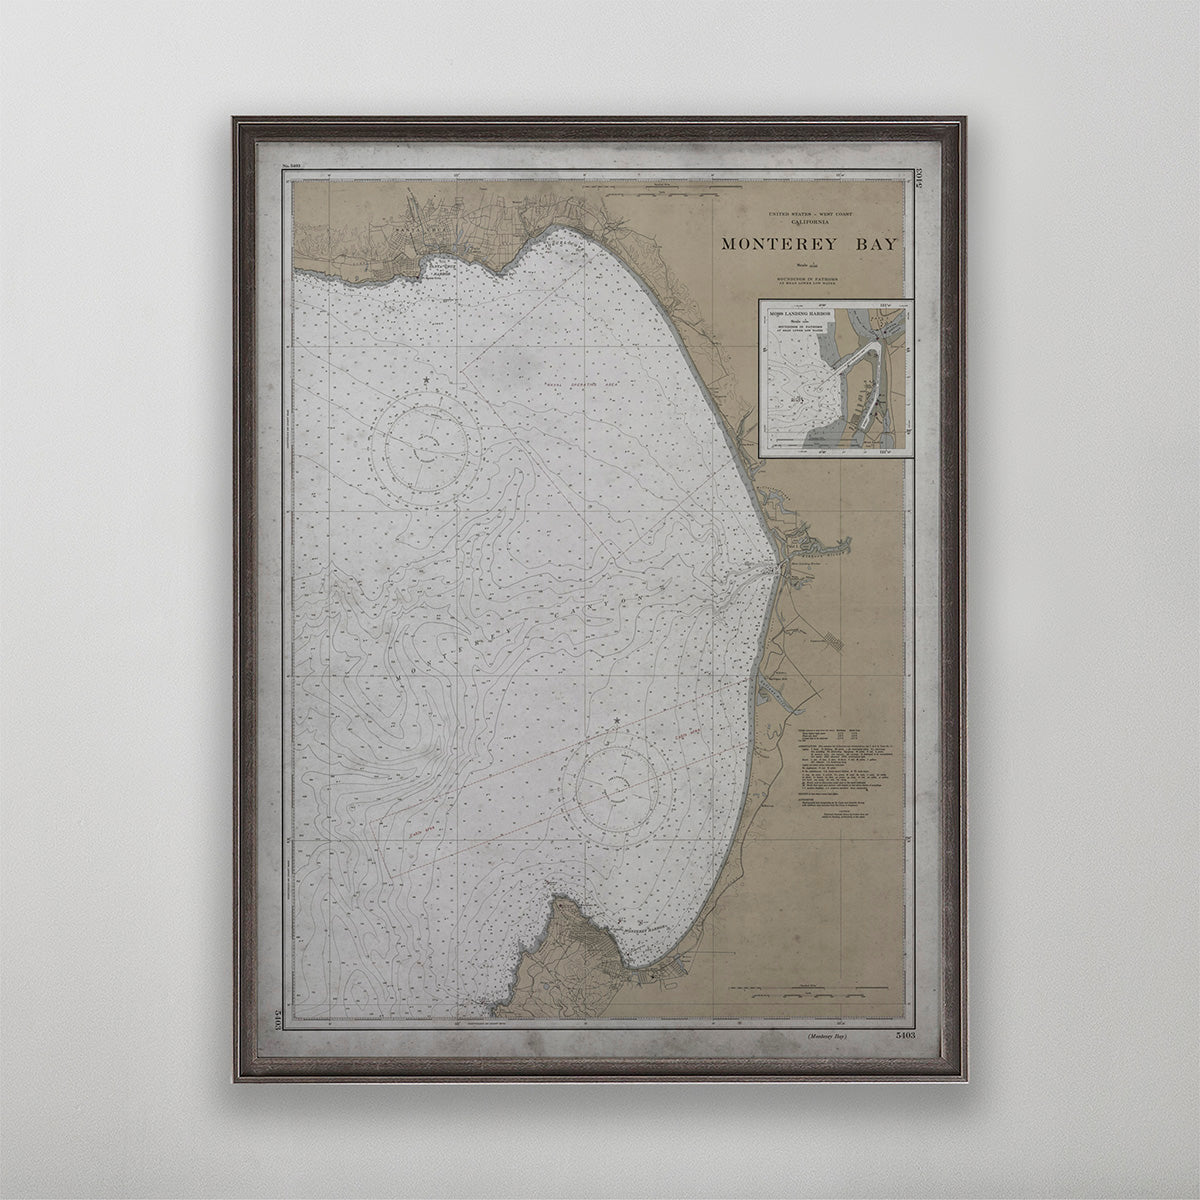 Old vintage historic nautical chart of Monterey Bay wall art home decor. 